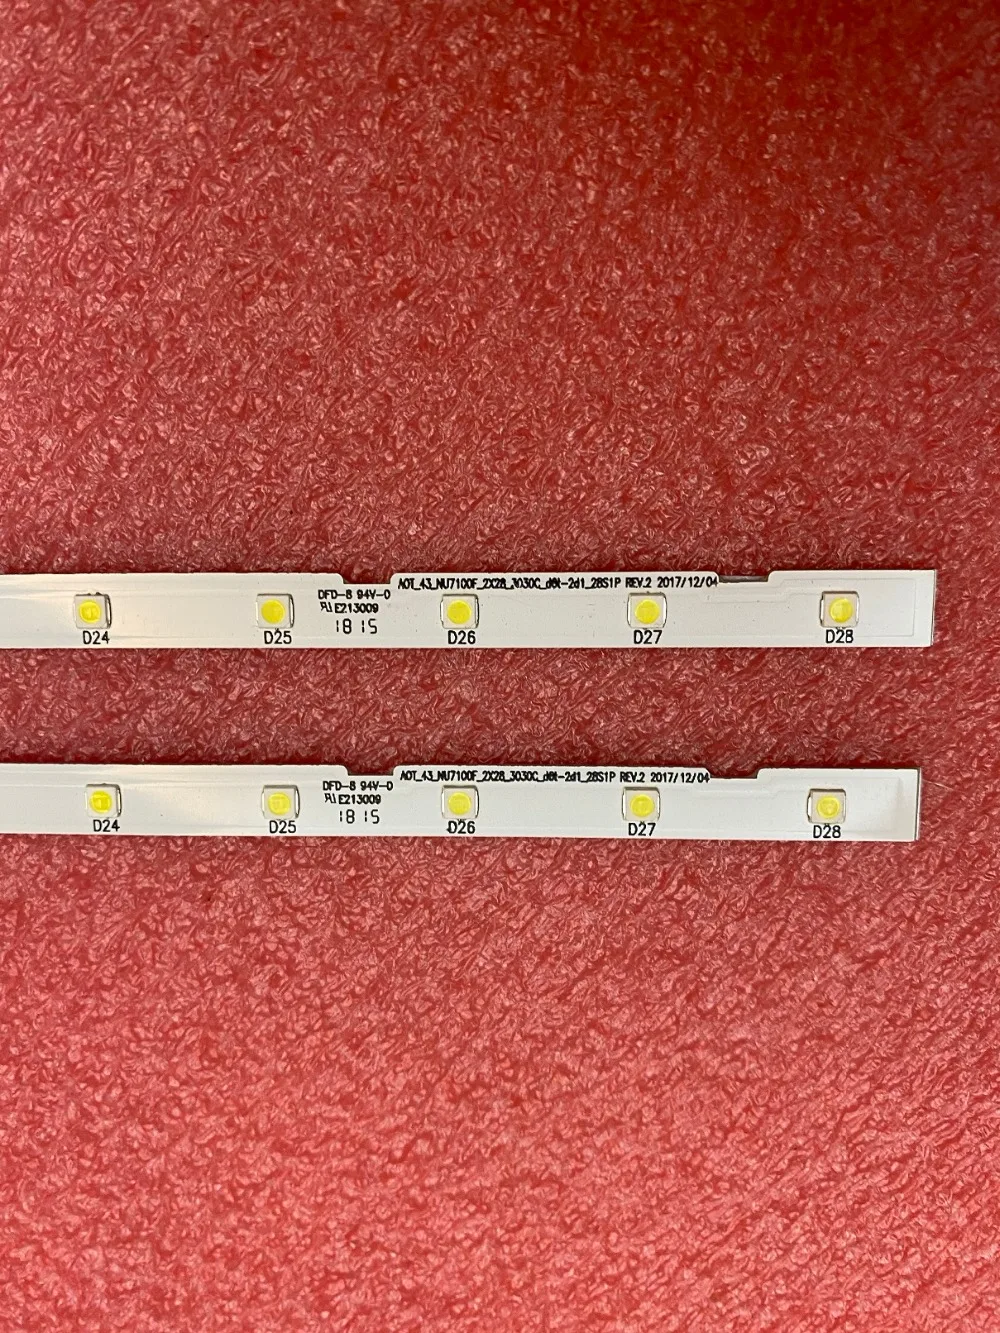 Replacement Part for TV LED Backlight Strip for Samsung 43NU7100 UE43NU7100 UN43NU7100 UE43NU7100U AOT_43_NU7100F UE43NU7120U UE43NU7170U BN96-45954A Length: Other